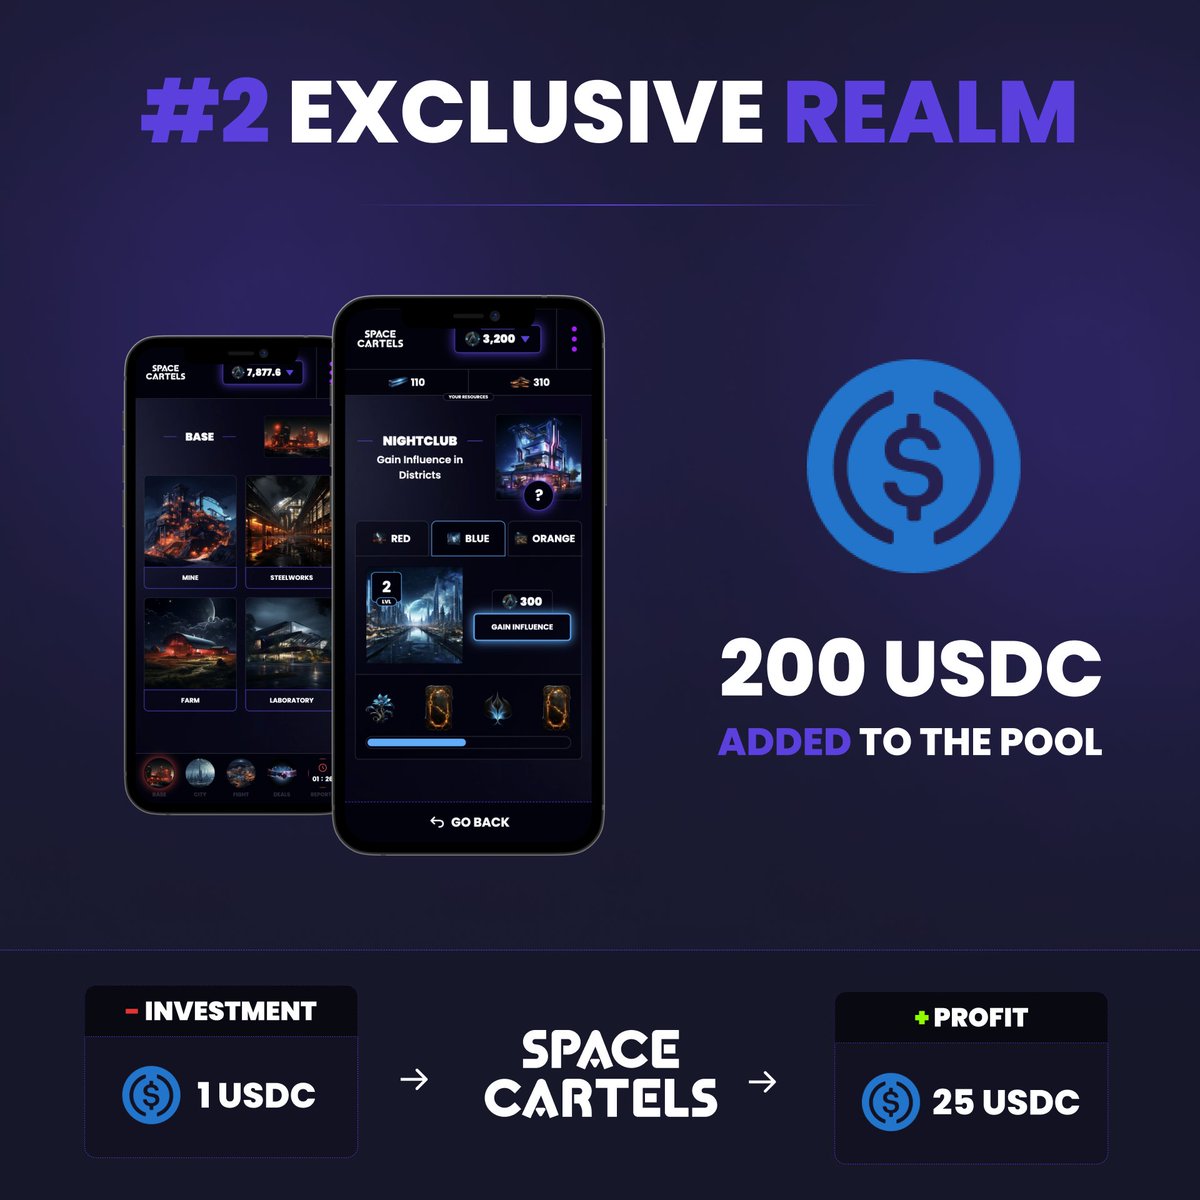 We're kicking off registration for the next Exclusive Realm! 🏆 200 USDC added to the pool, 🥇 Minimum 25 USDC for 1st place, 💵 Registration with just 1 $USDC! Registration link in the comments!👇